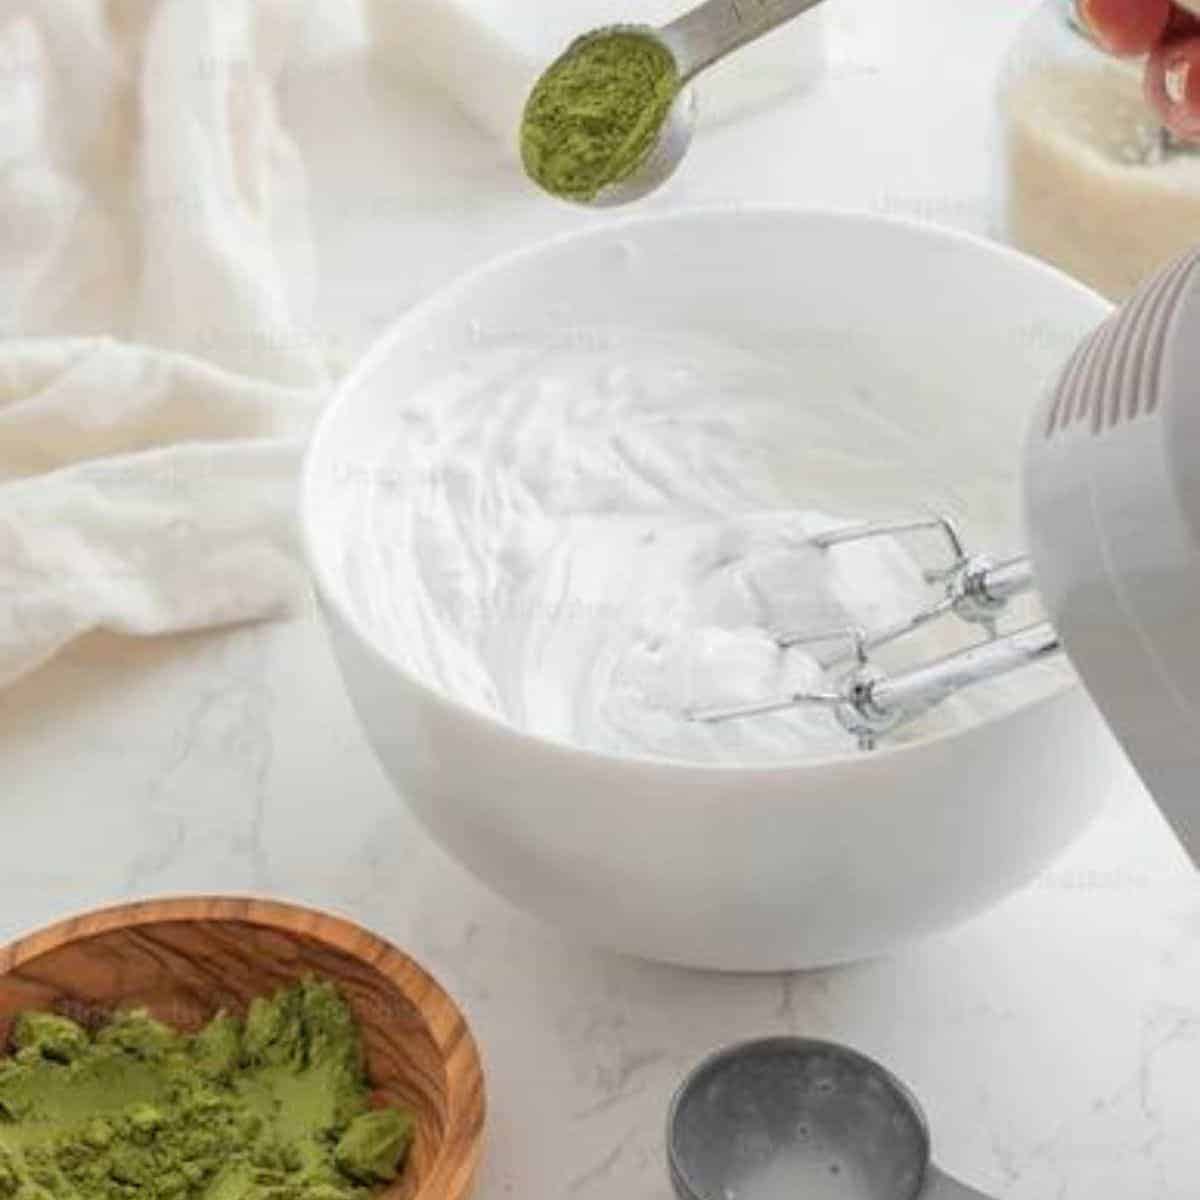 Electric mixer used in mixing cream cheese and matcha powder to make a green cheesecake